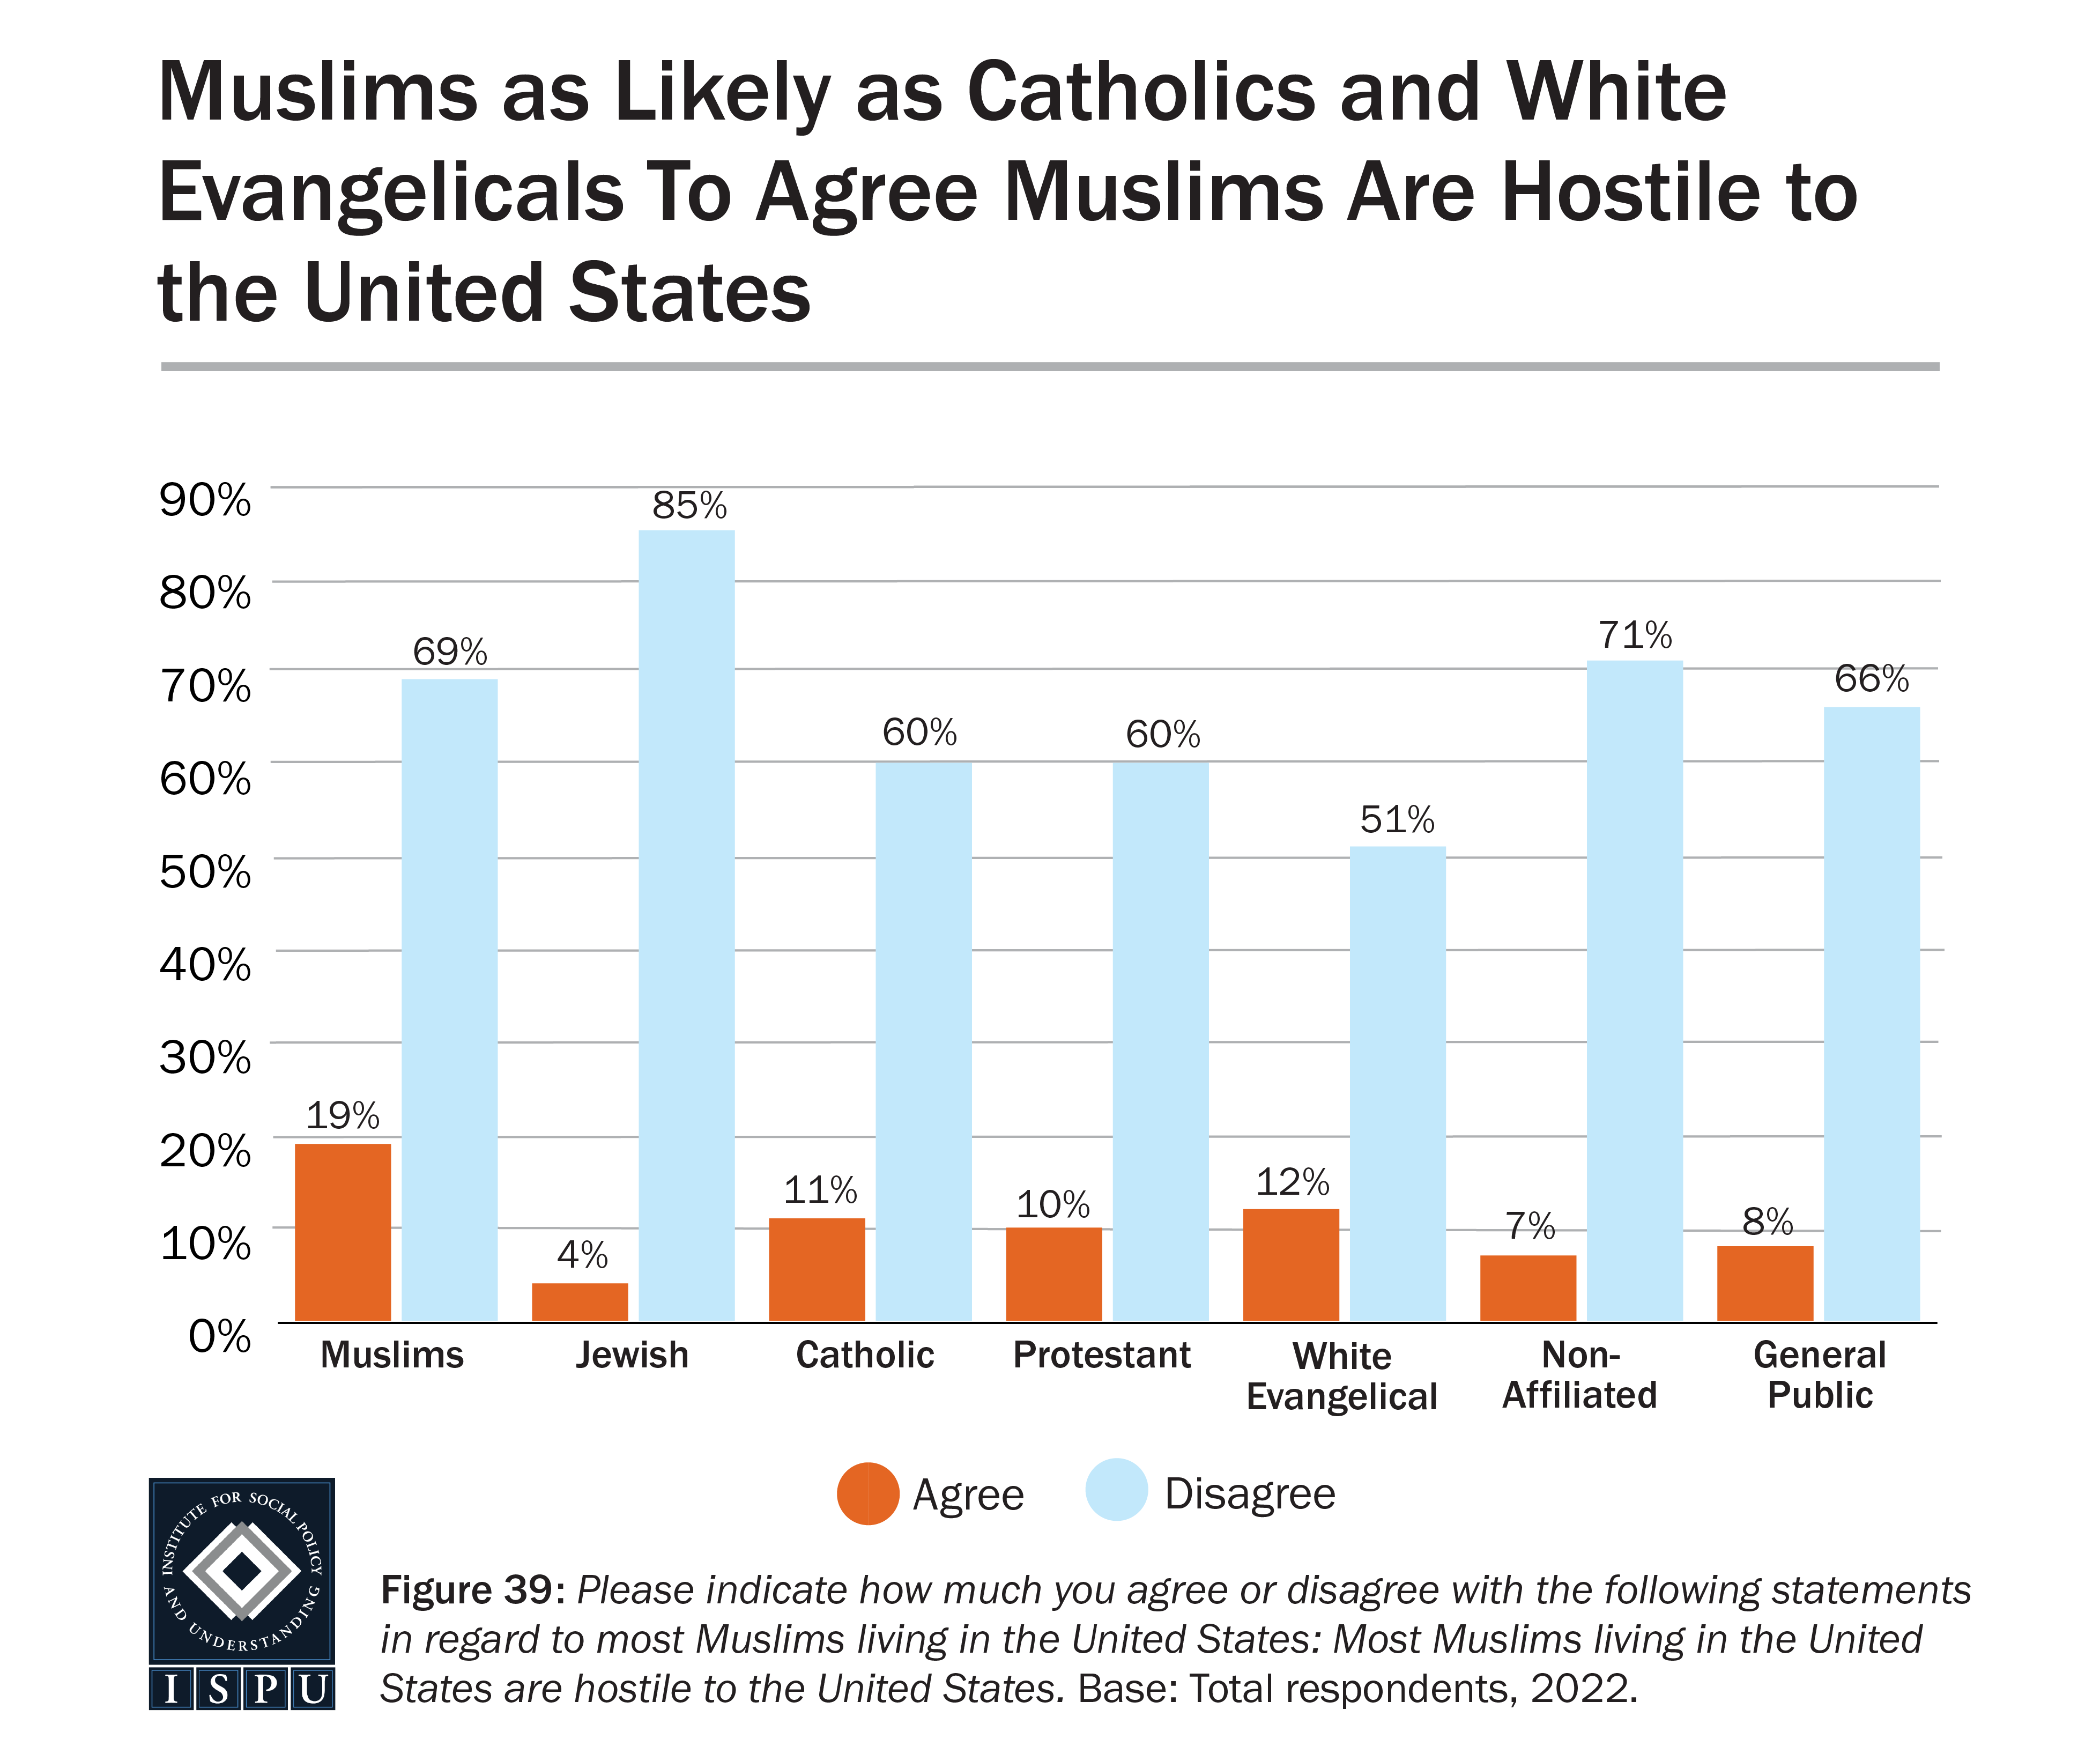 A bar graph showing the proportion of all groups surveyed who agree or disagree with the false notion that most Muslims living in the US are hostile to the United States.